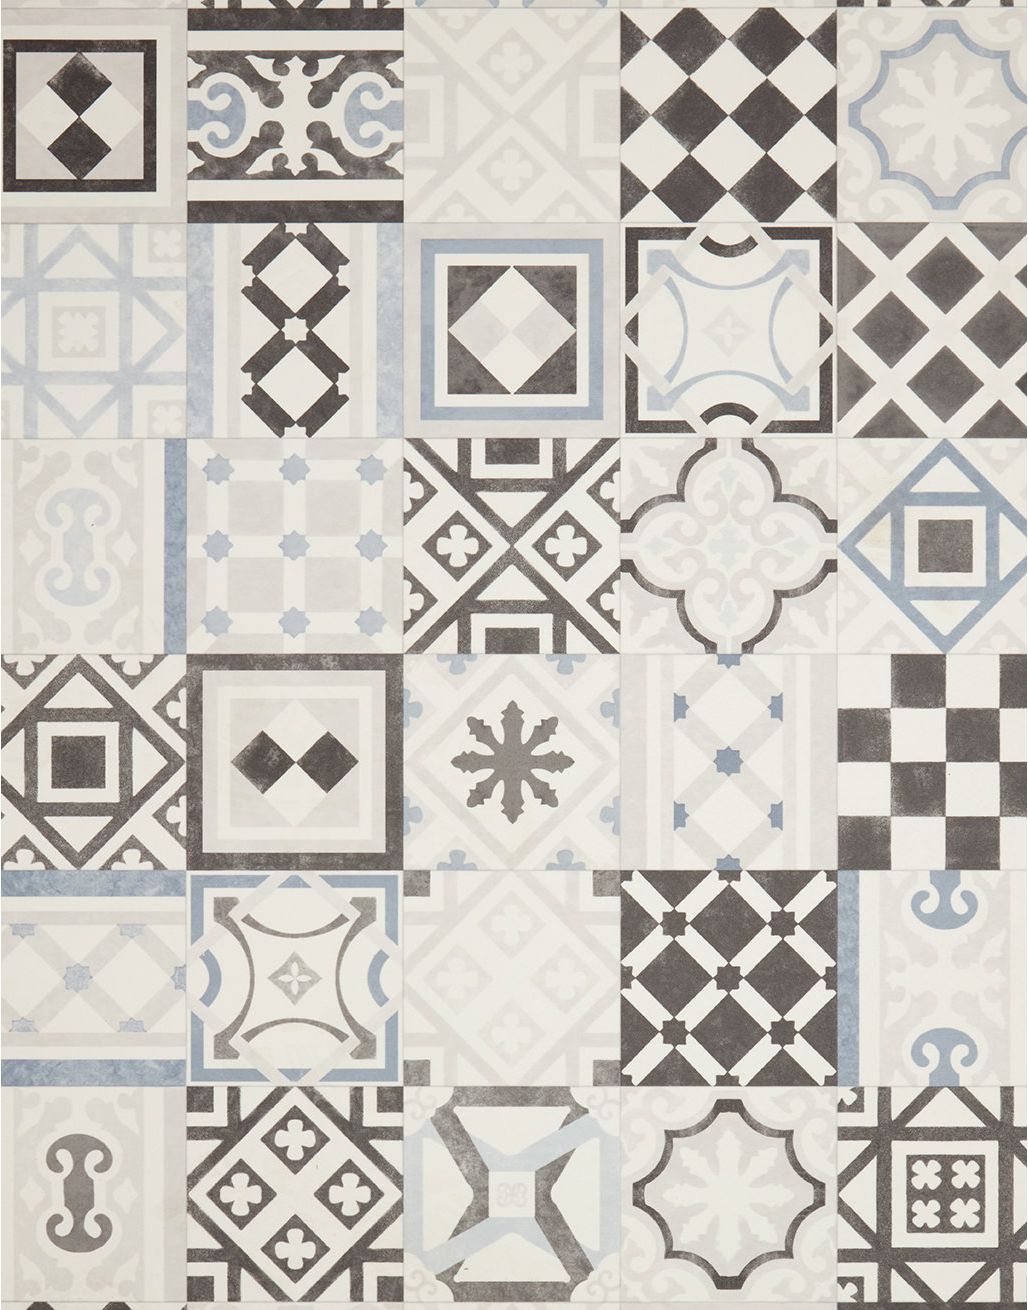 Patterned Tiles - Mosaic 3